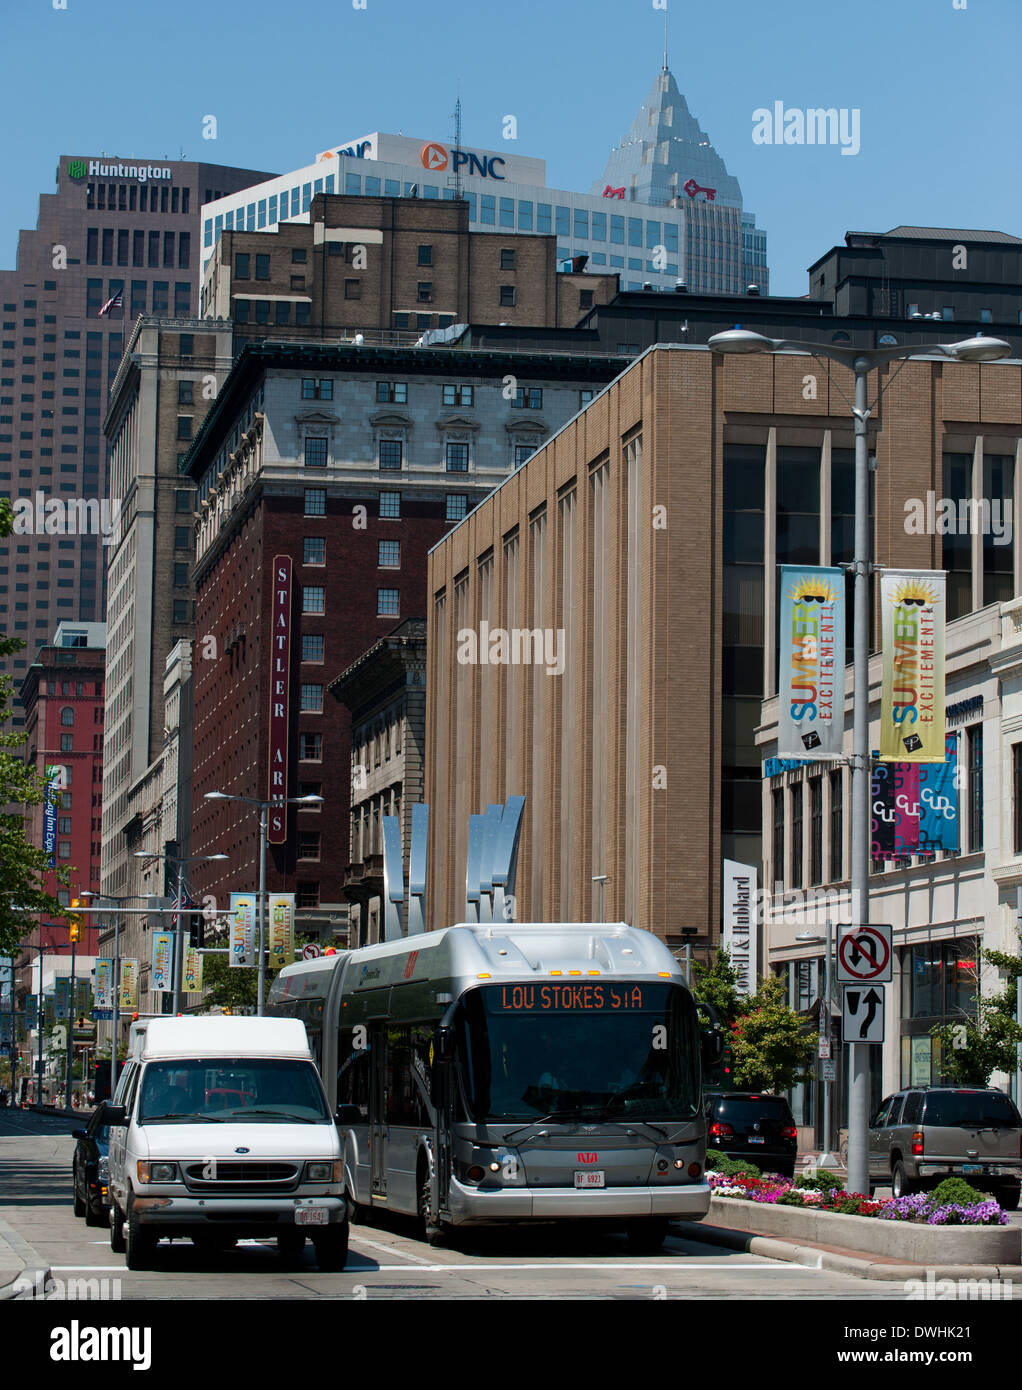 RTA Bus on the Health Line in Cleveland OHIO on Euclid Avenue Stock Photo